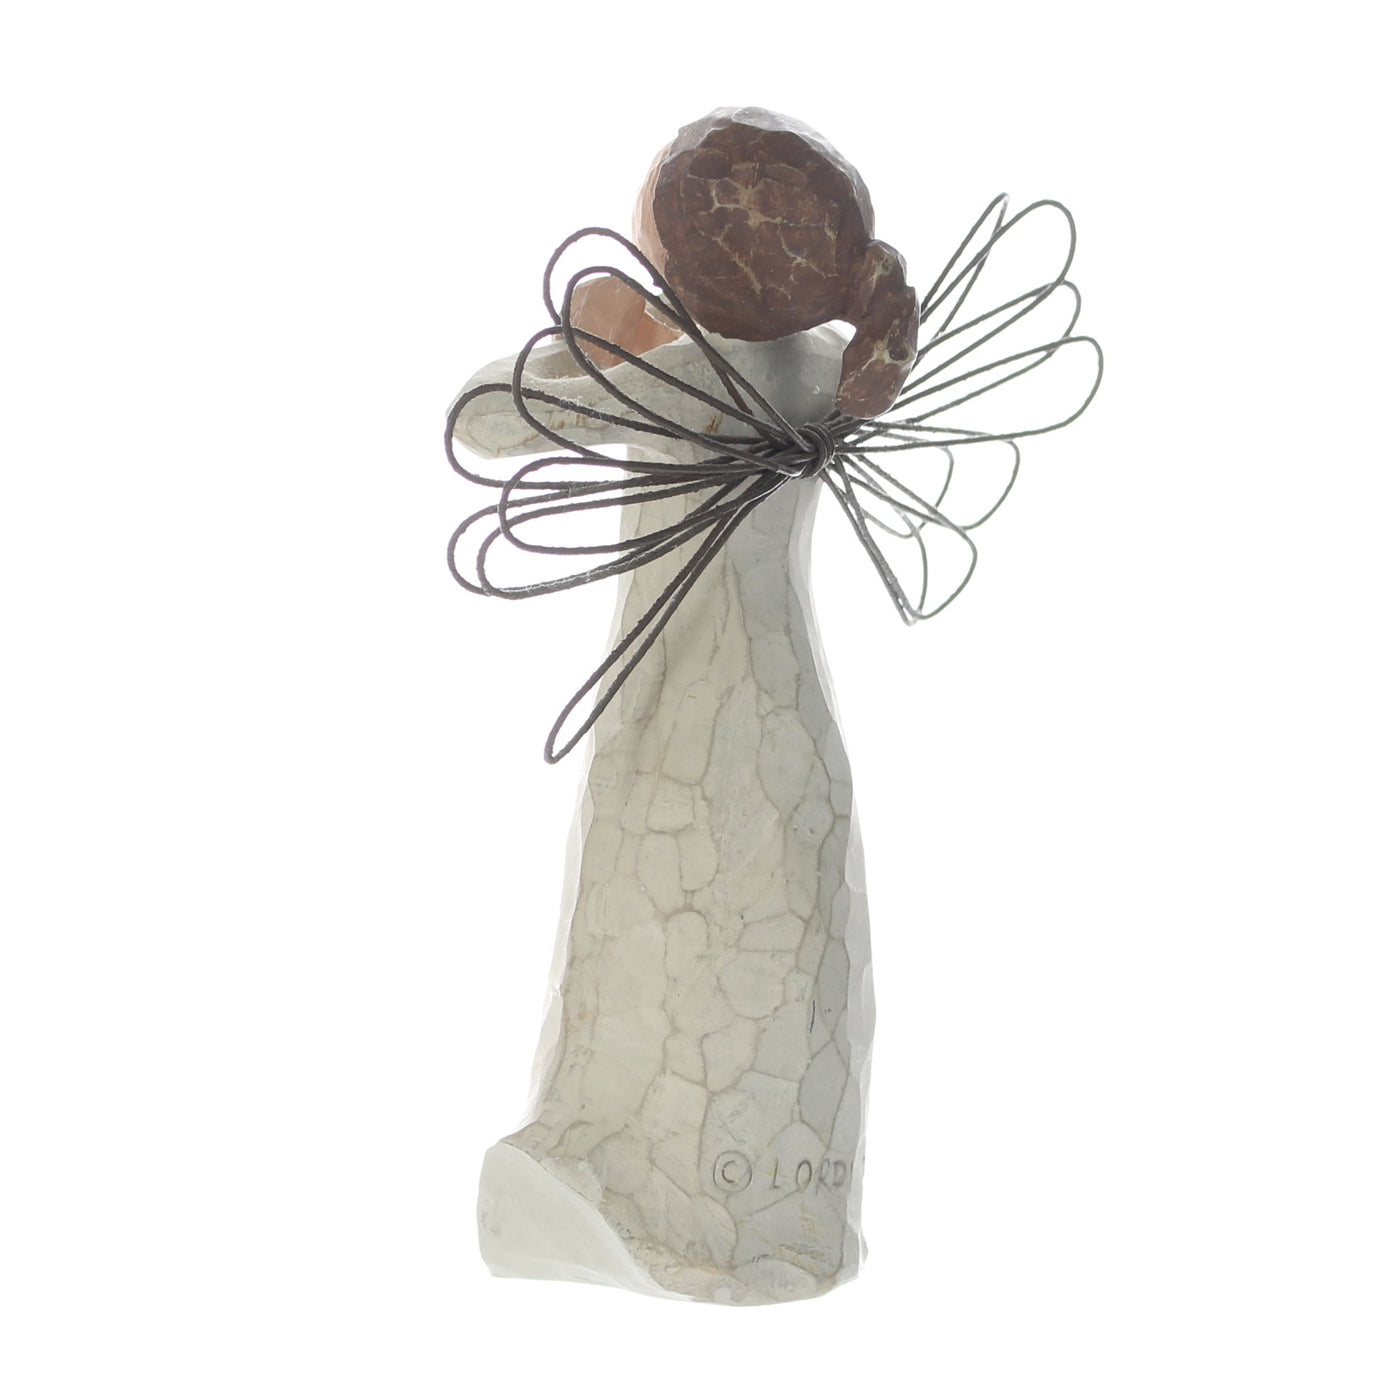 Willow-Tree-Resin-Figurine-Angel-of-Happiness